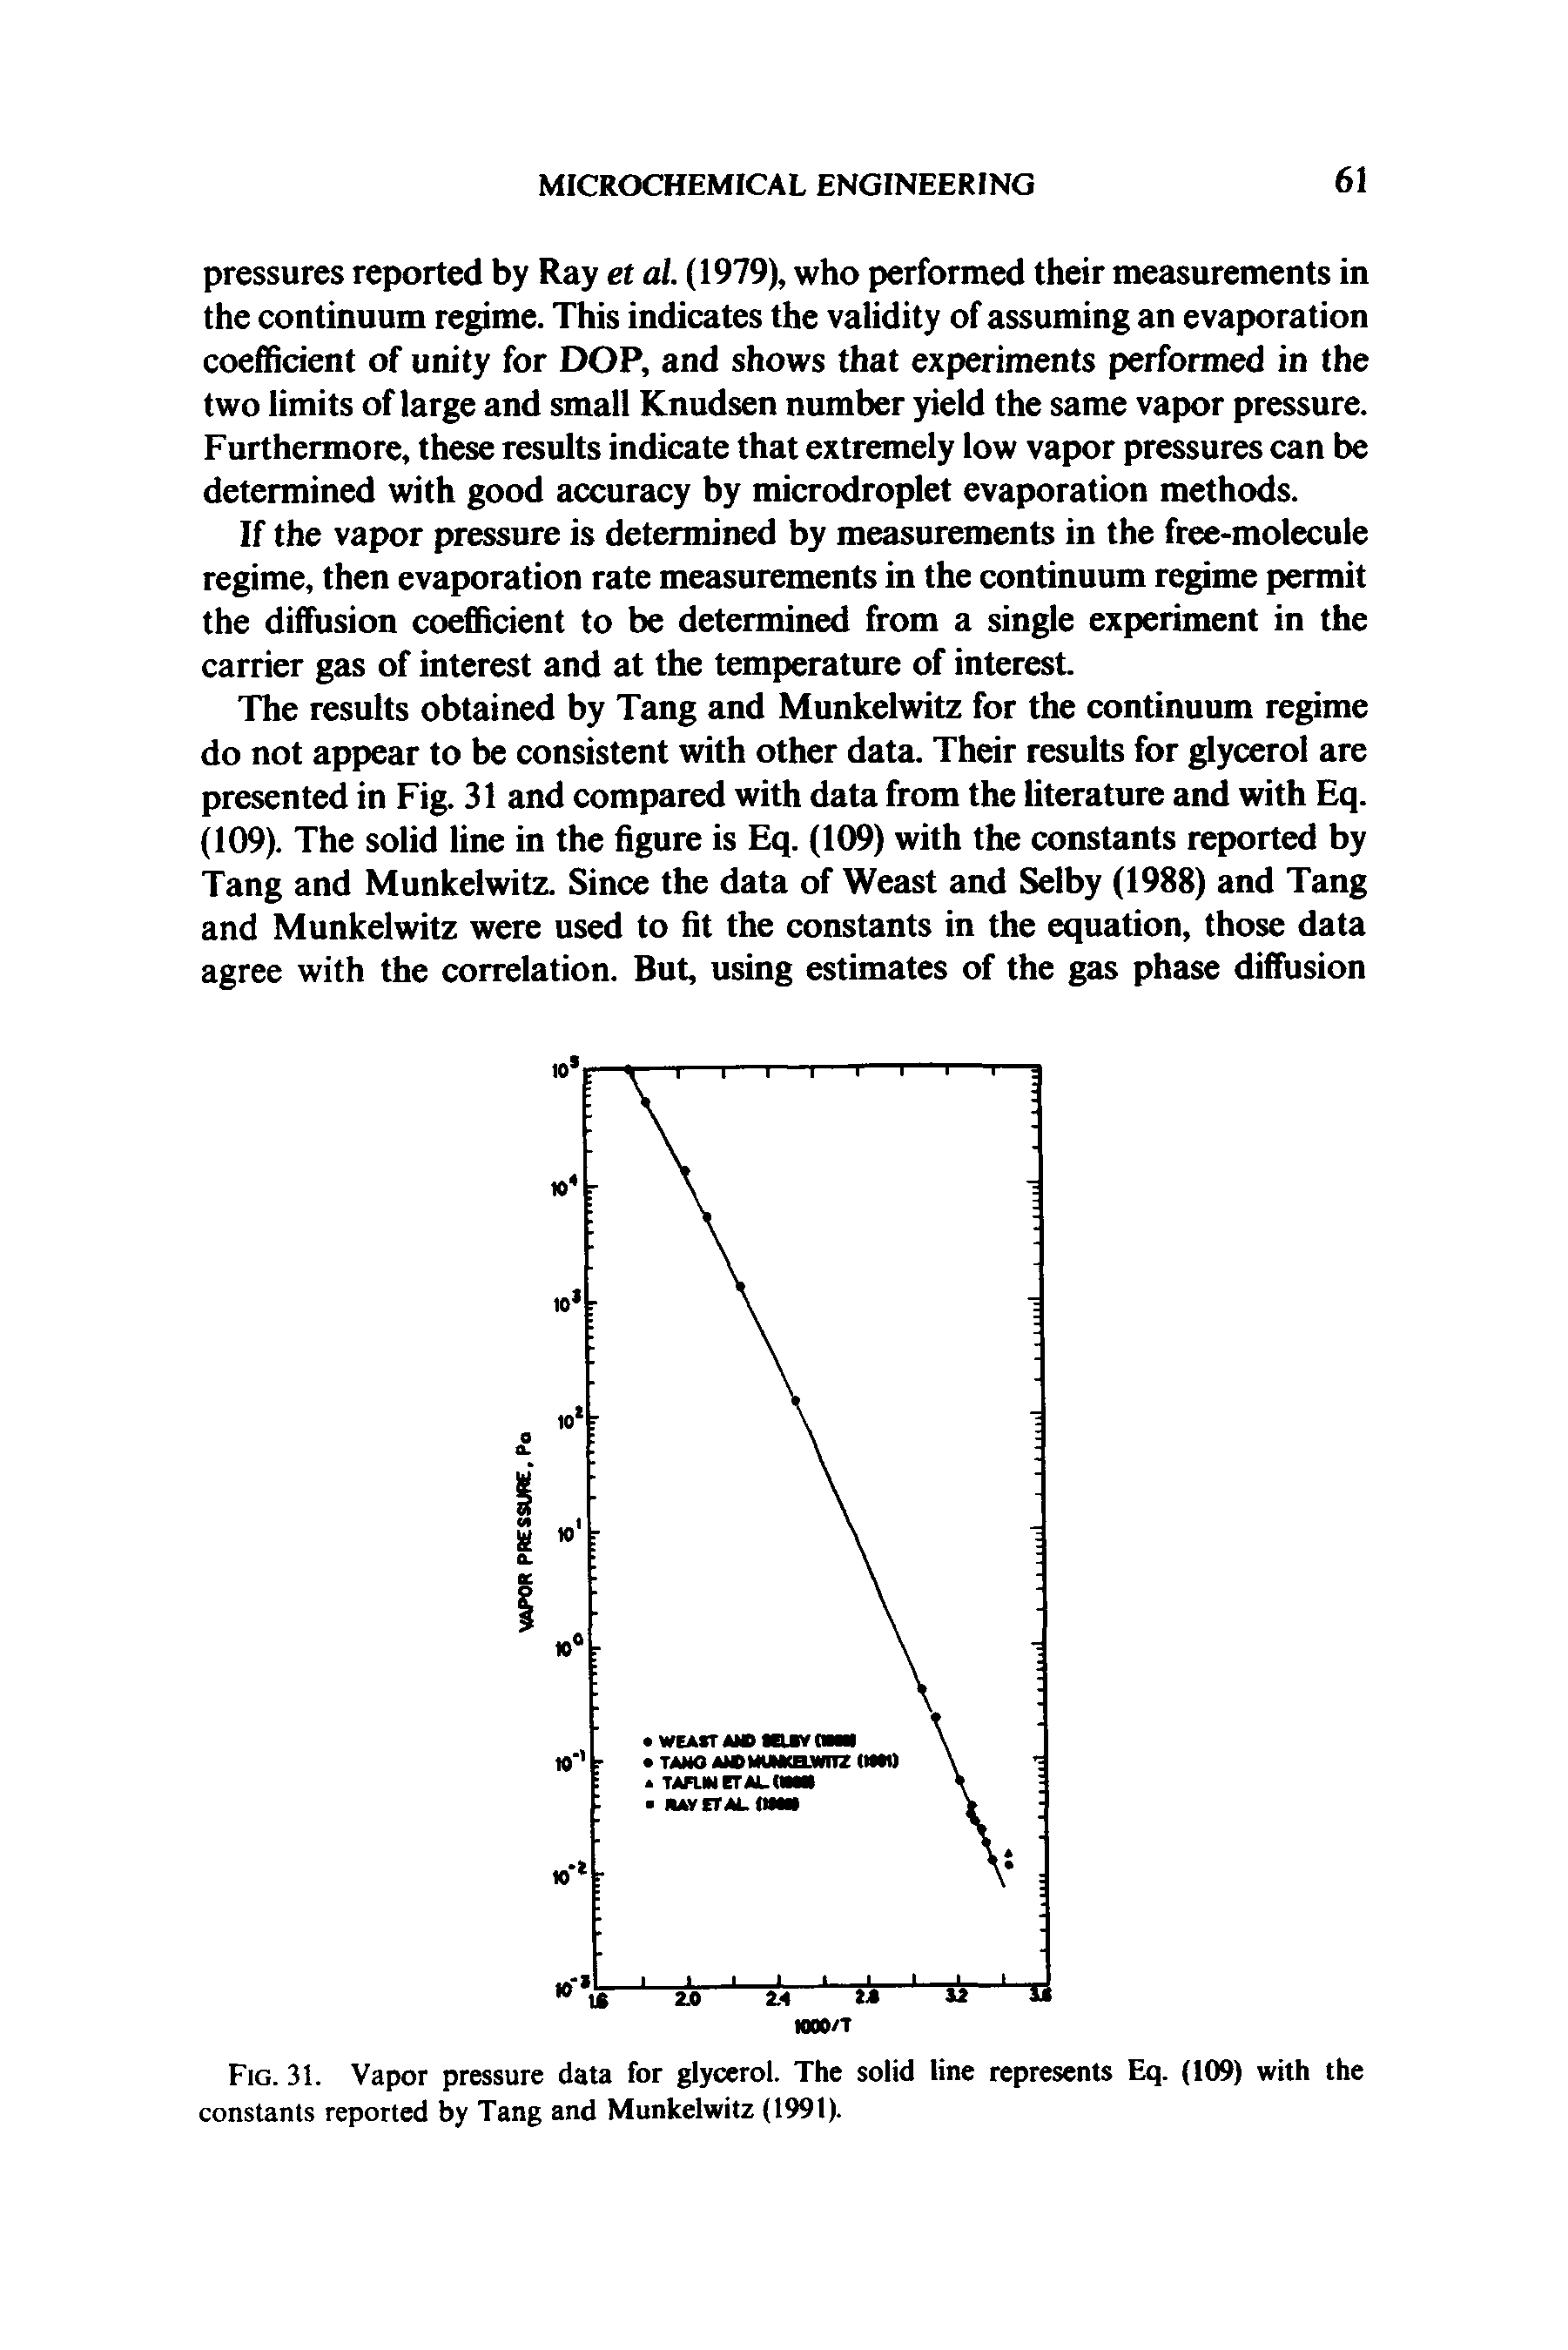 Fig. 31. Vapor pressure data for glycerol. The solid line represents Eq. (109) with the constants reported by Tang and Munkelwitz (1991).